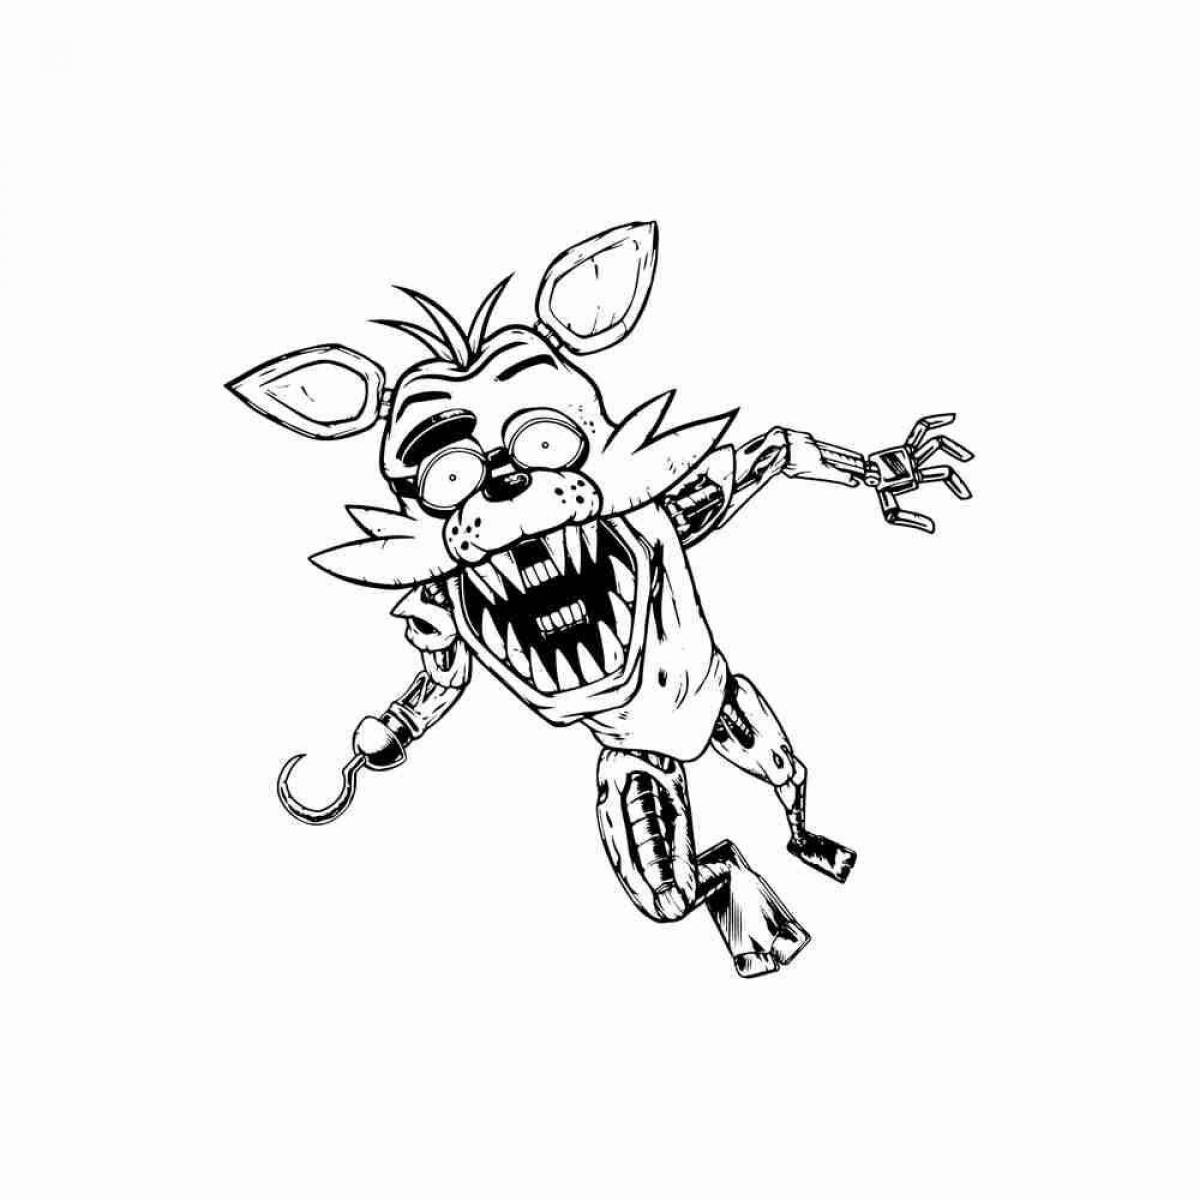 Great foxy animatronic coloring book